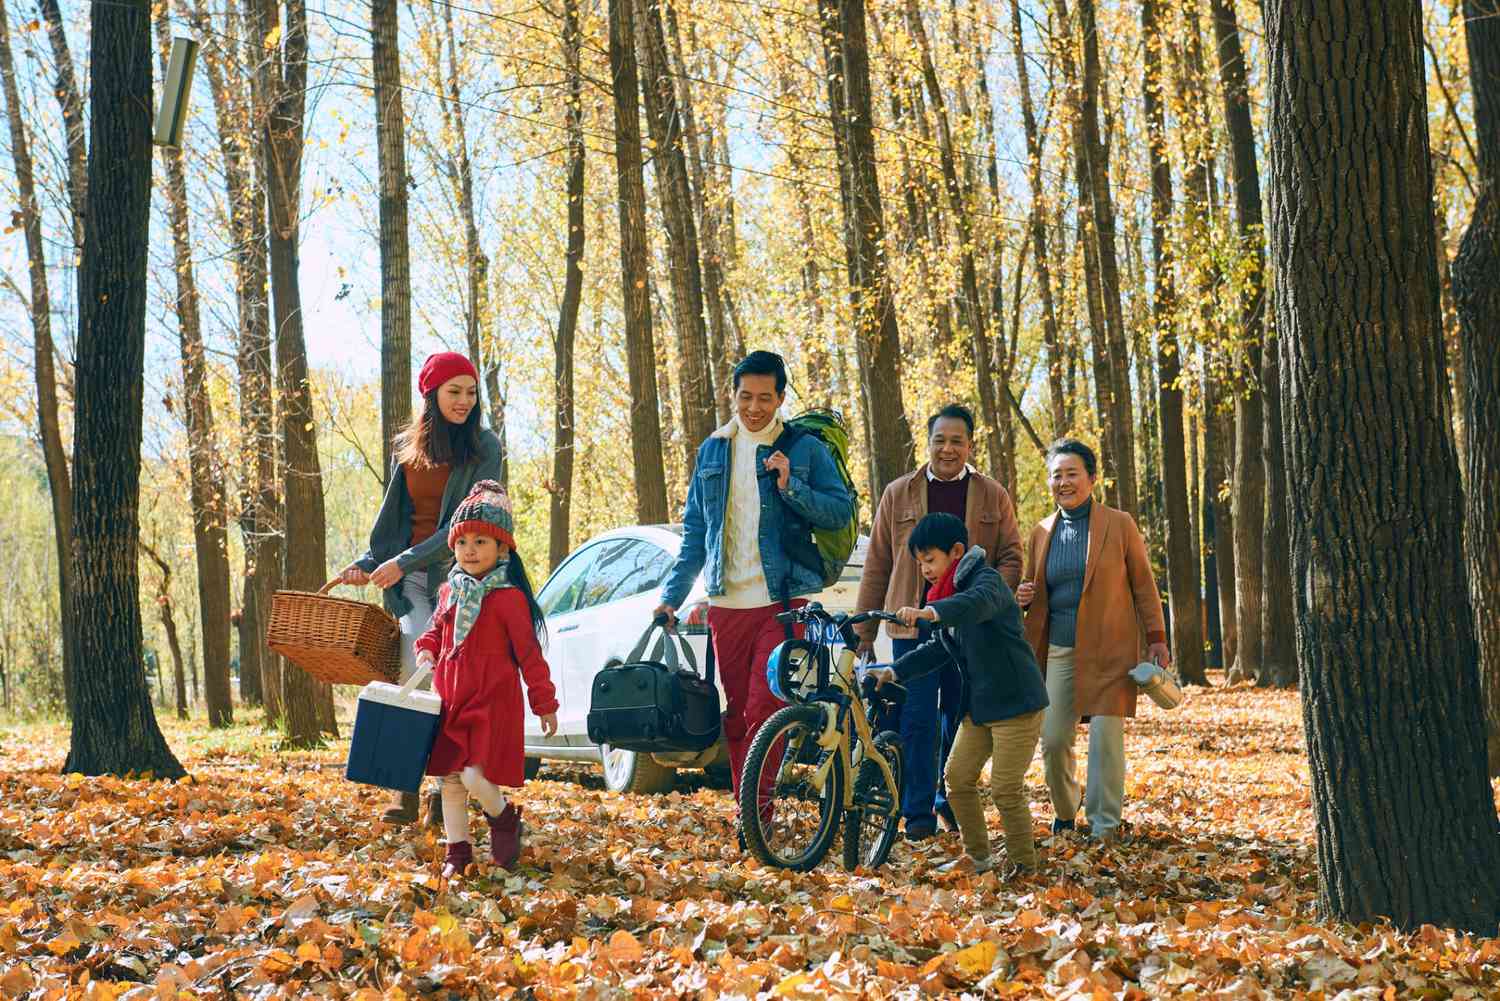 An image of a family on a trip in the fall.